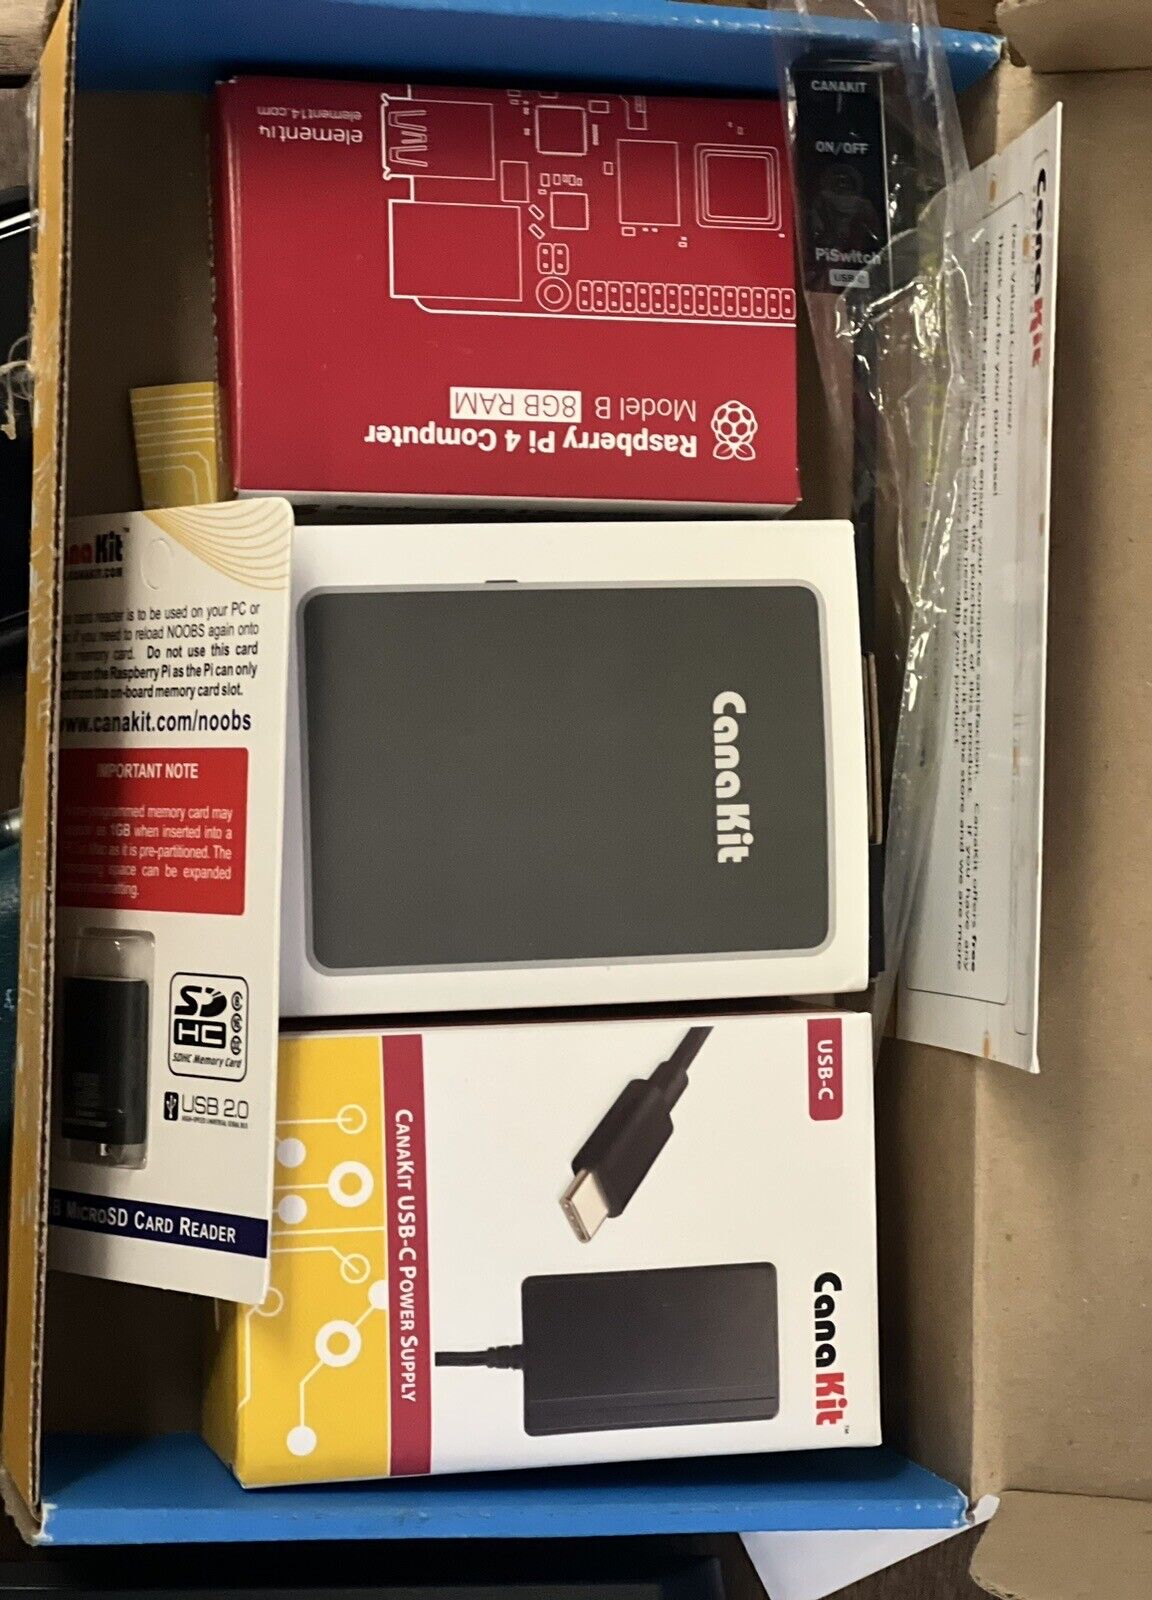 Canakit Raspberry Pi 4 8gb RAM Starter Kit BRAND NEW. Available Now for 125.00